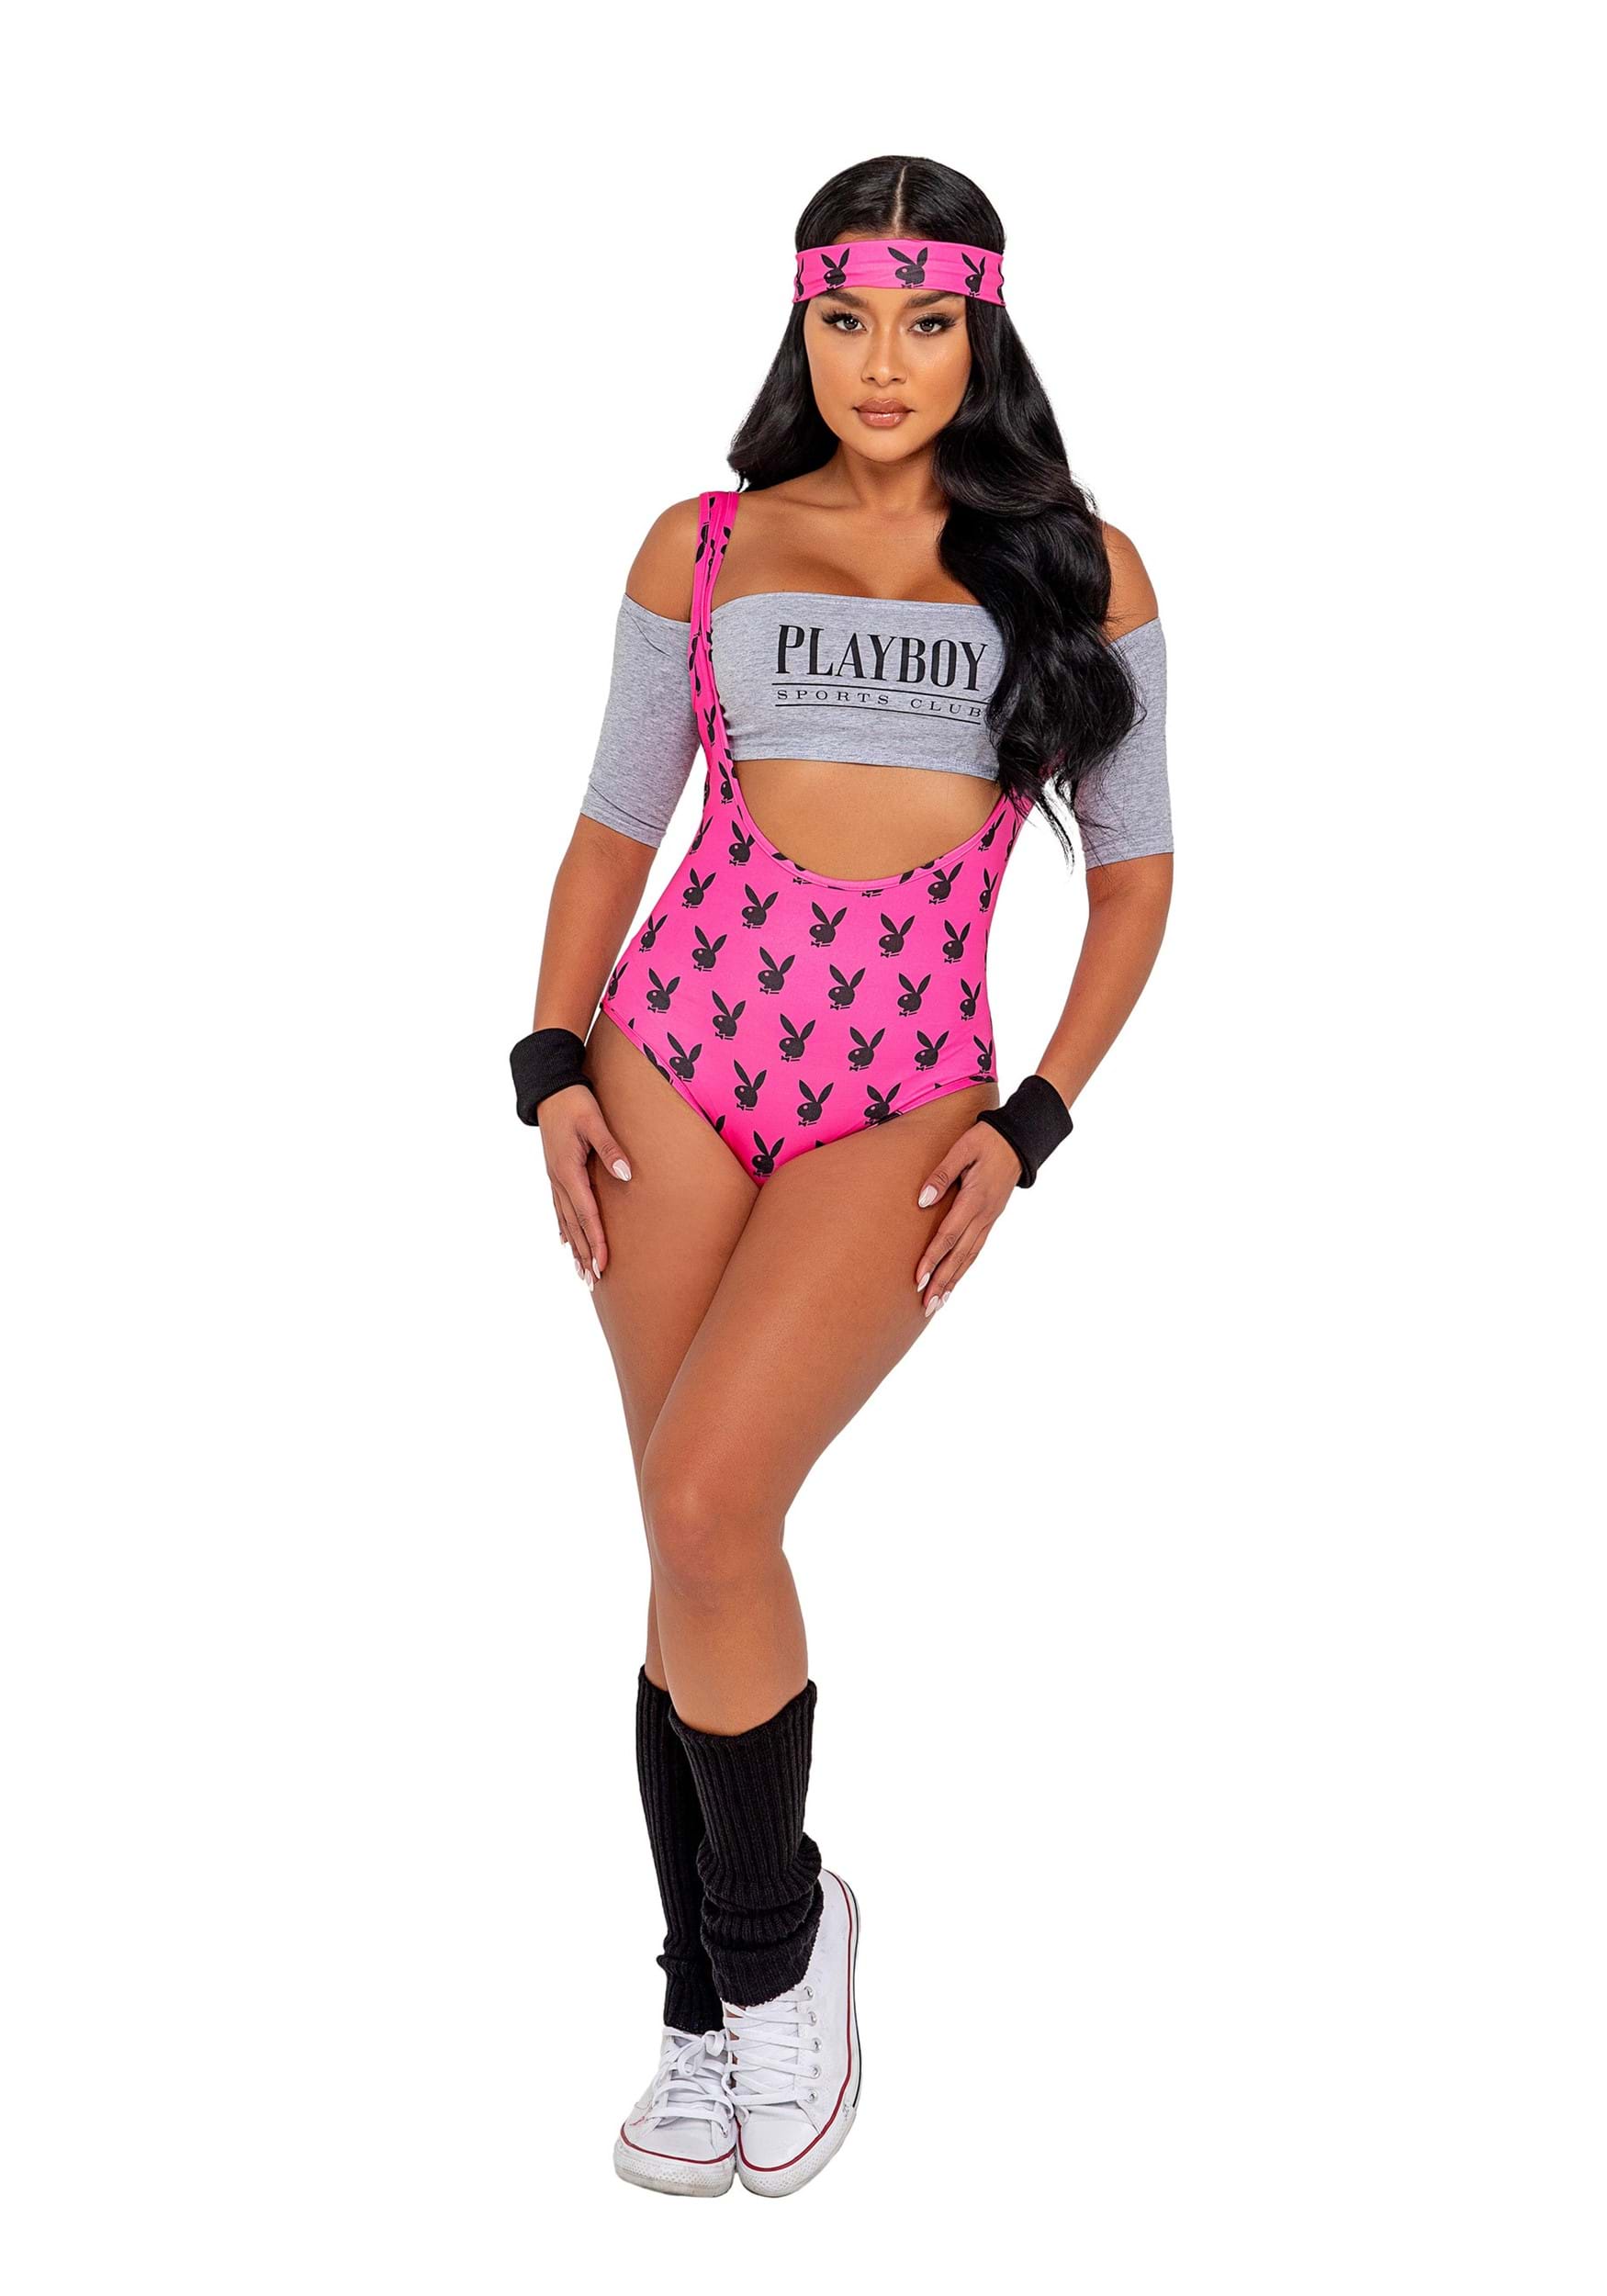 Image of Playboy Retro Physical Costume for Women ID ROPB144-S